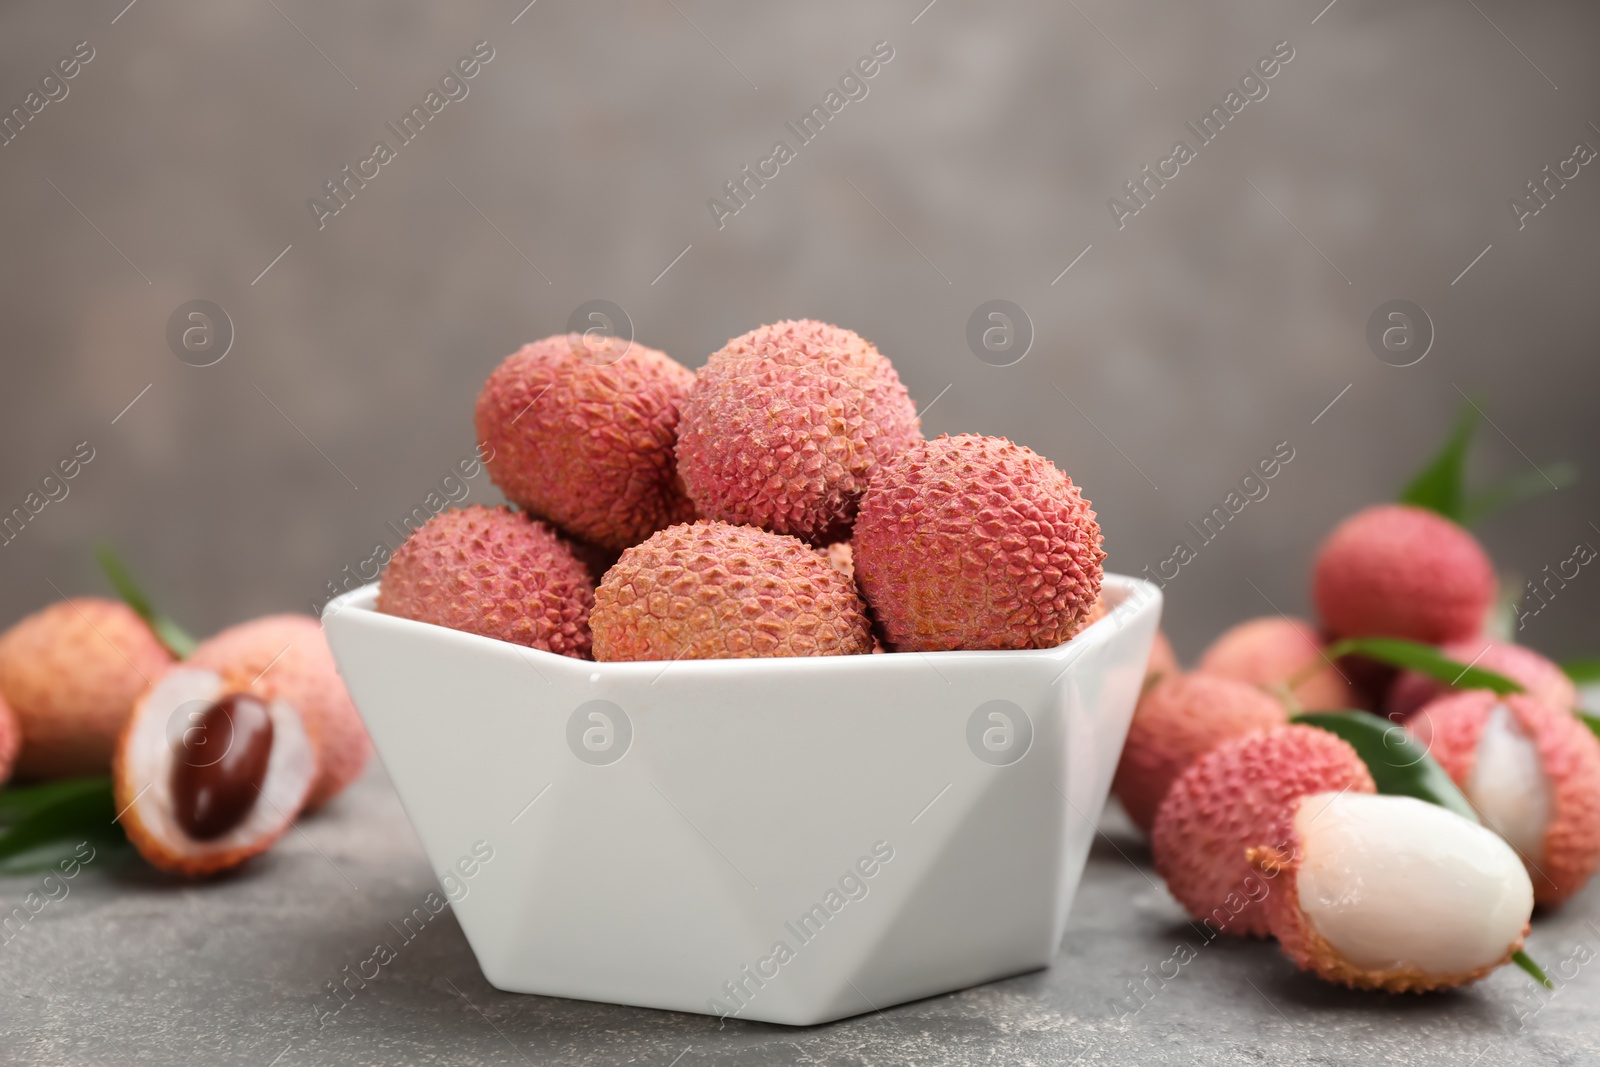 Photo of Fresh ripe lychee fruits in white ceramic bowl on grey table